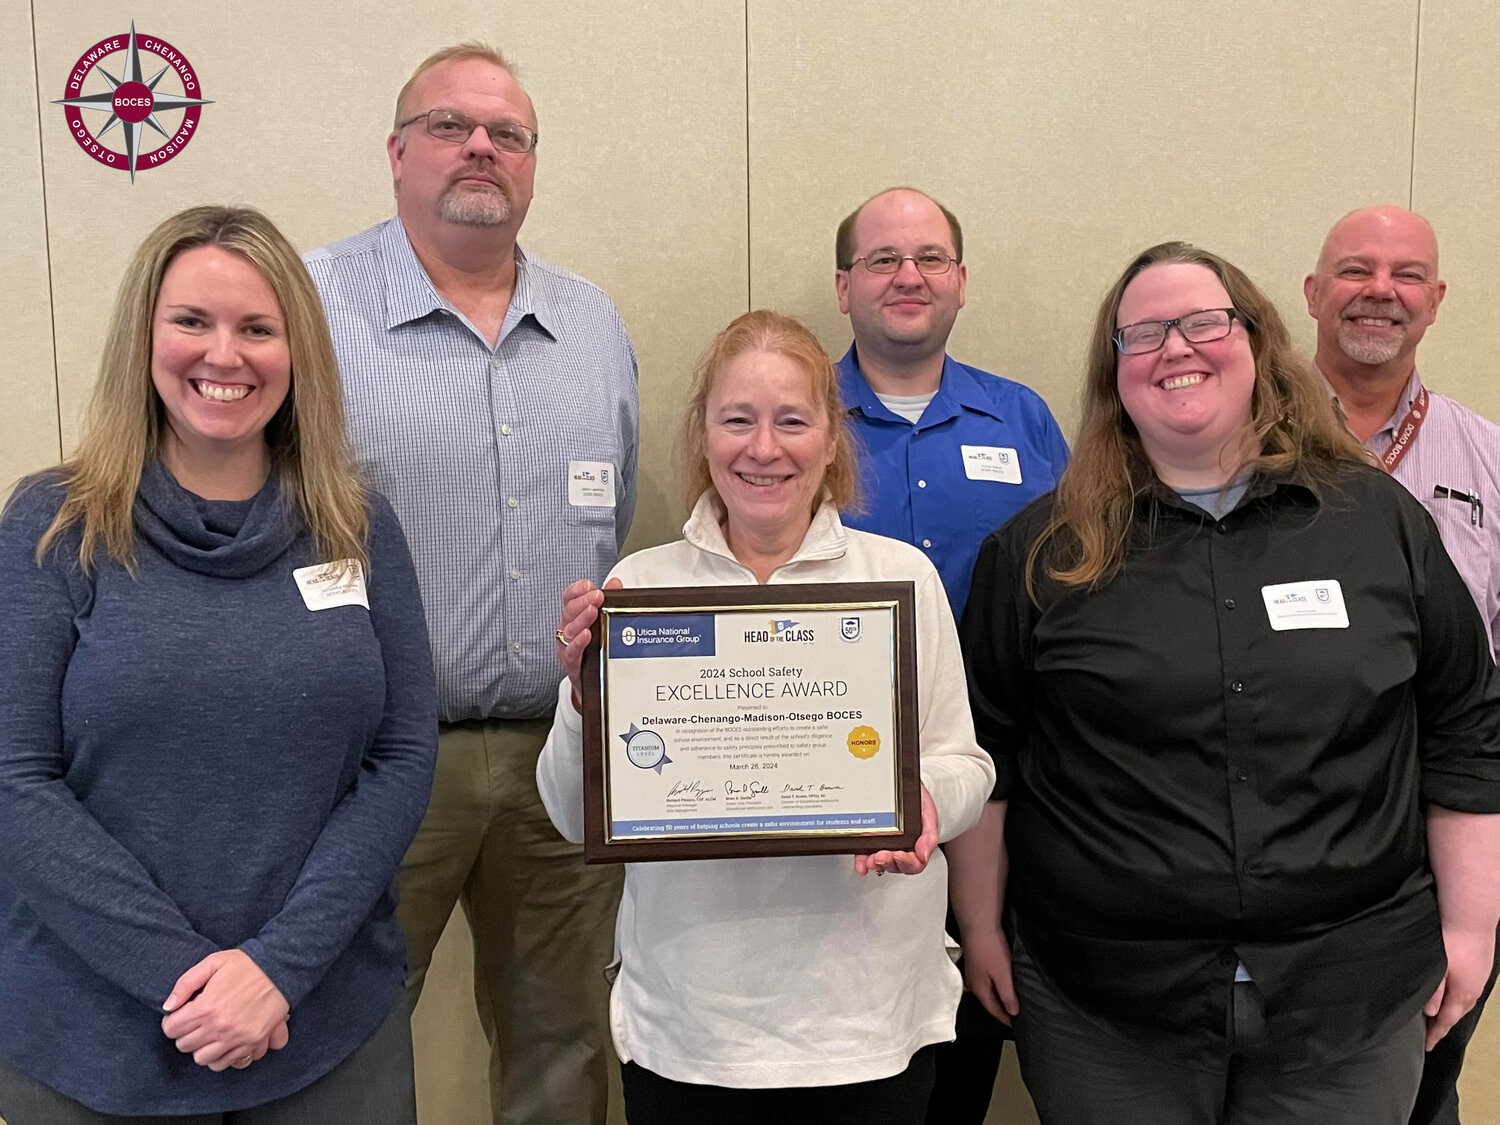 Receiving Utica National’s School Safety Excellence Award on behalf of DCMO BOCES were Board President Vanessa Warren, Health & Safety Coordinator Jason Lawrence, Mental Health Coordinator Amanda Hoover, and Health & Safety staff Alison Bensley, Trevor Natoli, and Rick Shaw.